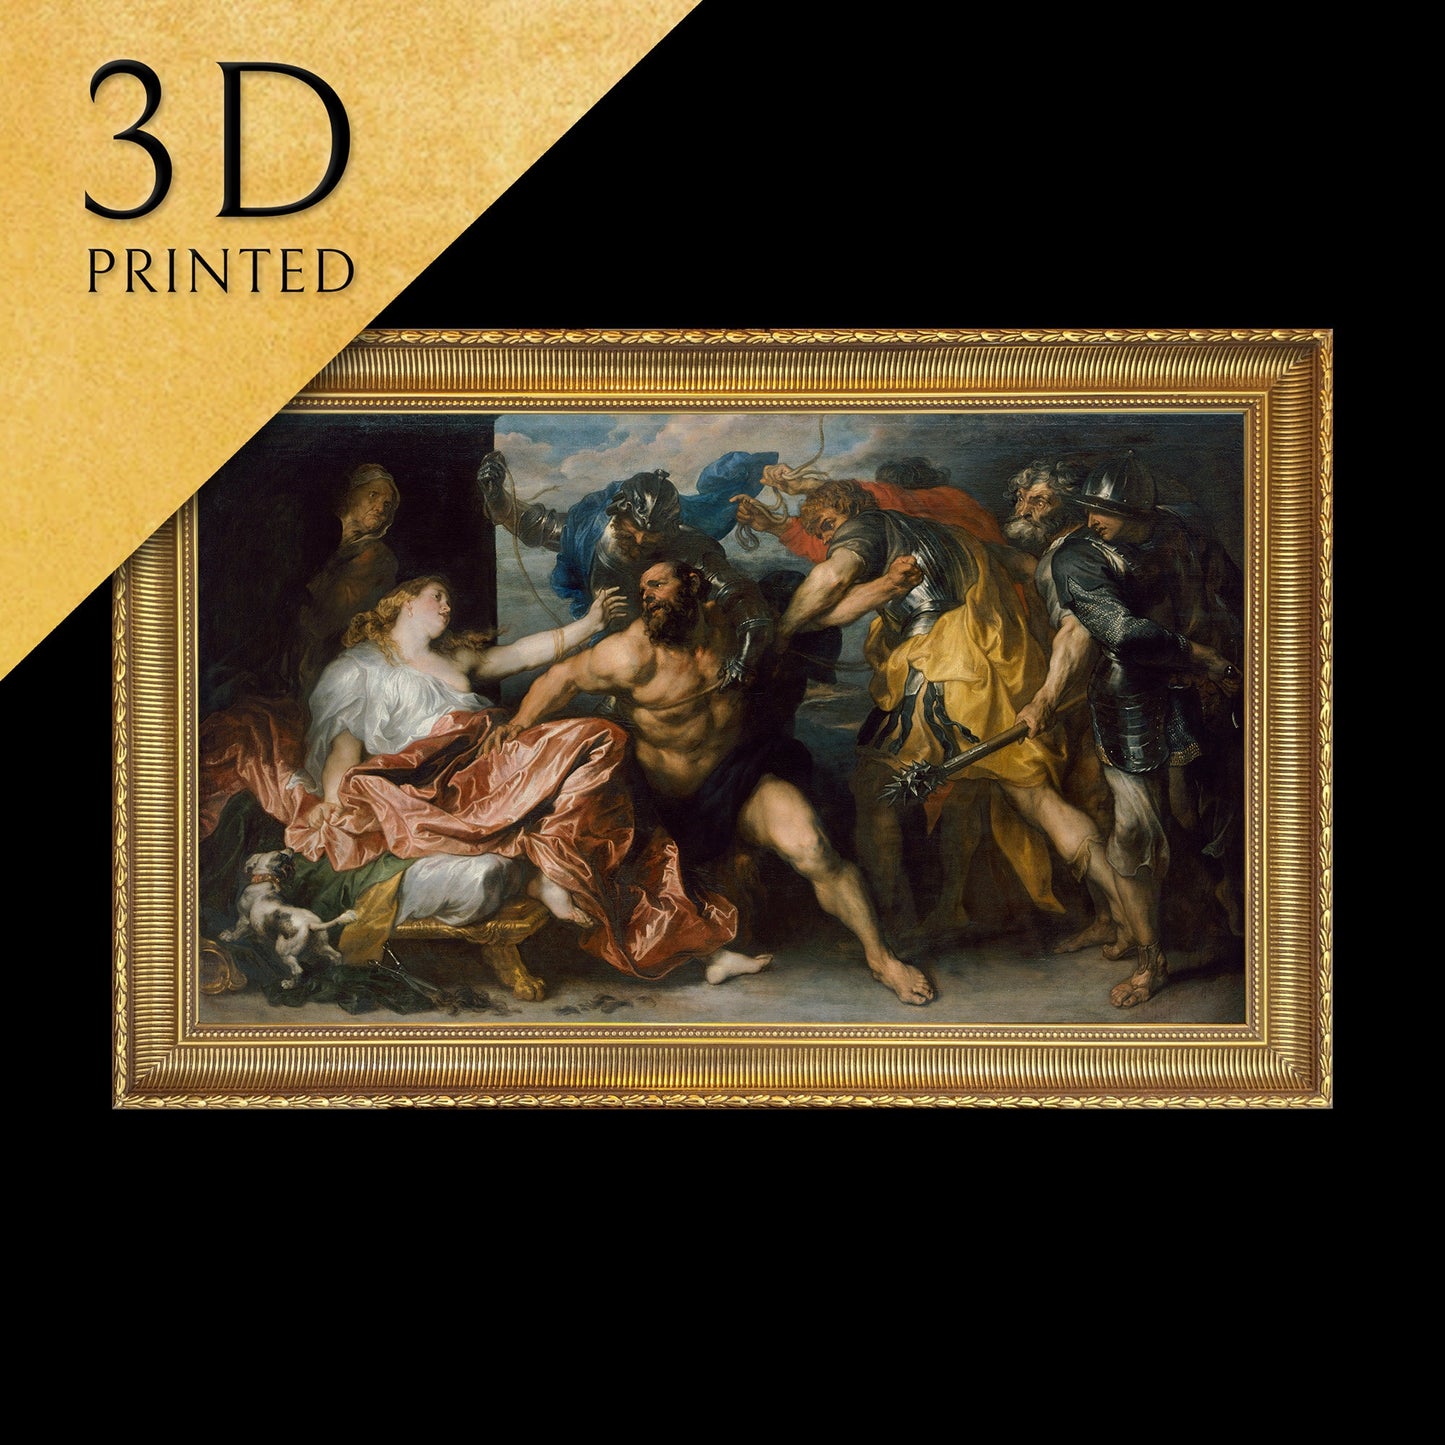 Samson and Delilah by Anthony van Dyck, 3d Printed with texture and brush strokes looks like original oil-painting, code:434